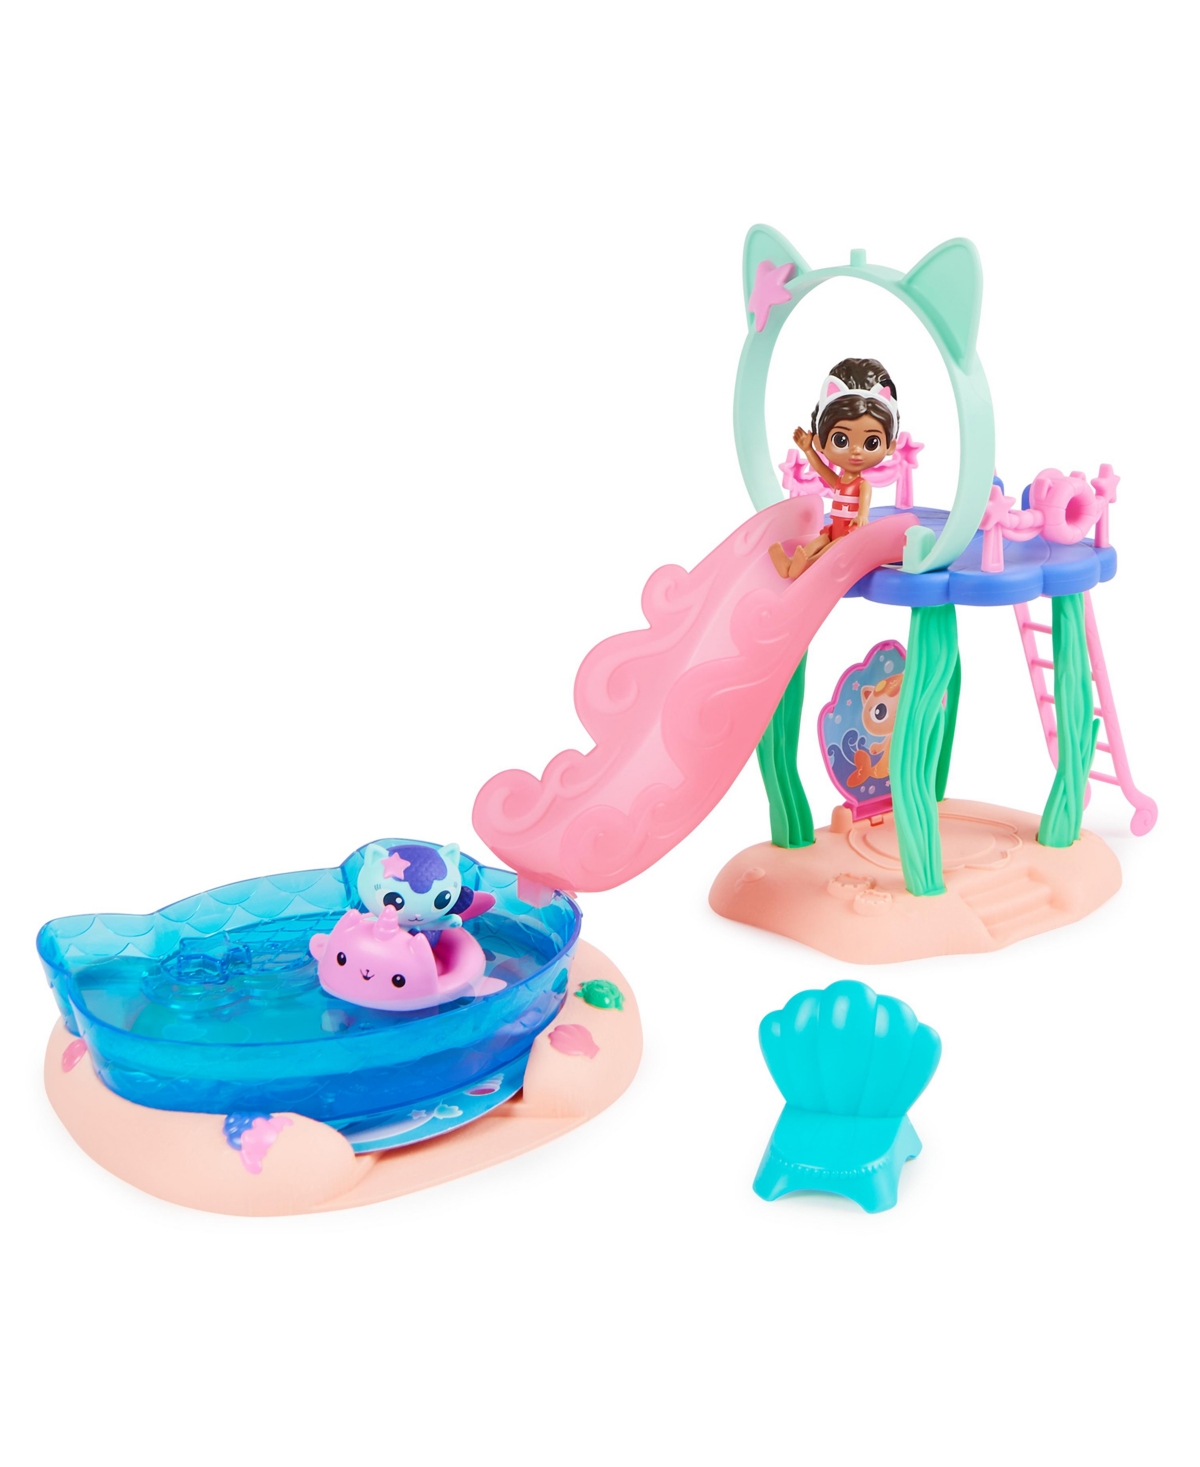 Gabby's Dollhouse Kids' Purr-ific Pool Playset With Gabby And Mercat Figures, & Pool Accessories In Multi-color